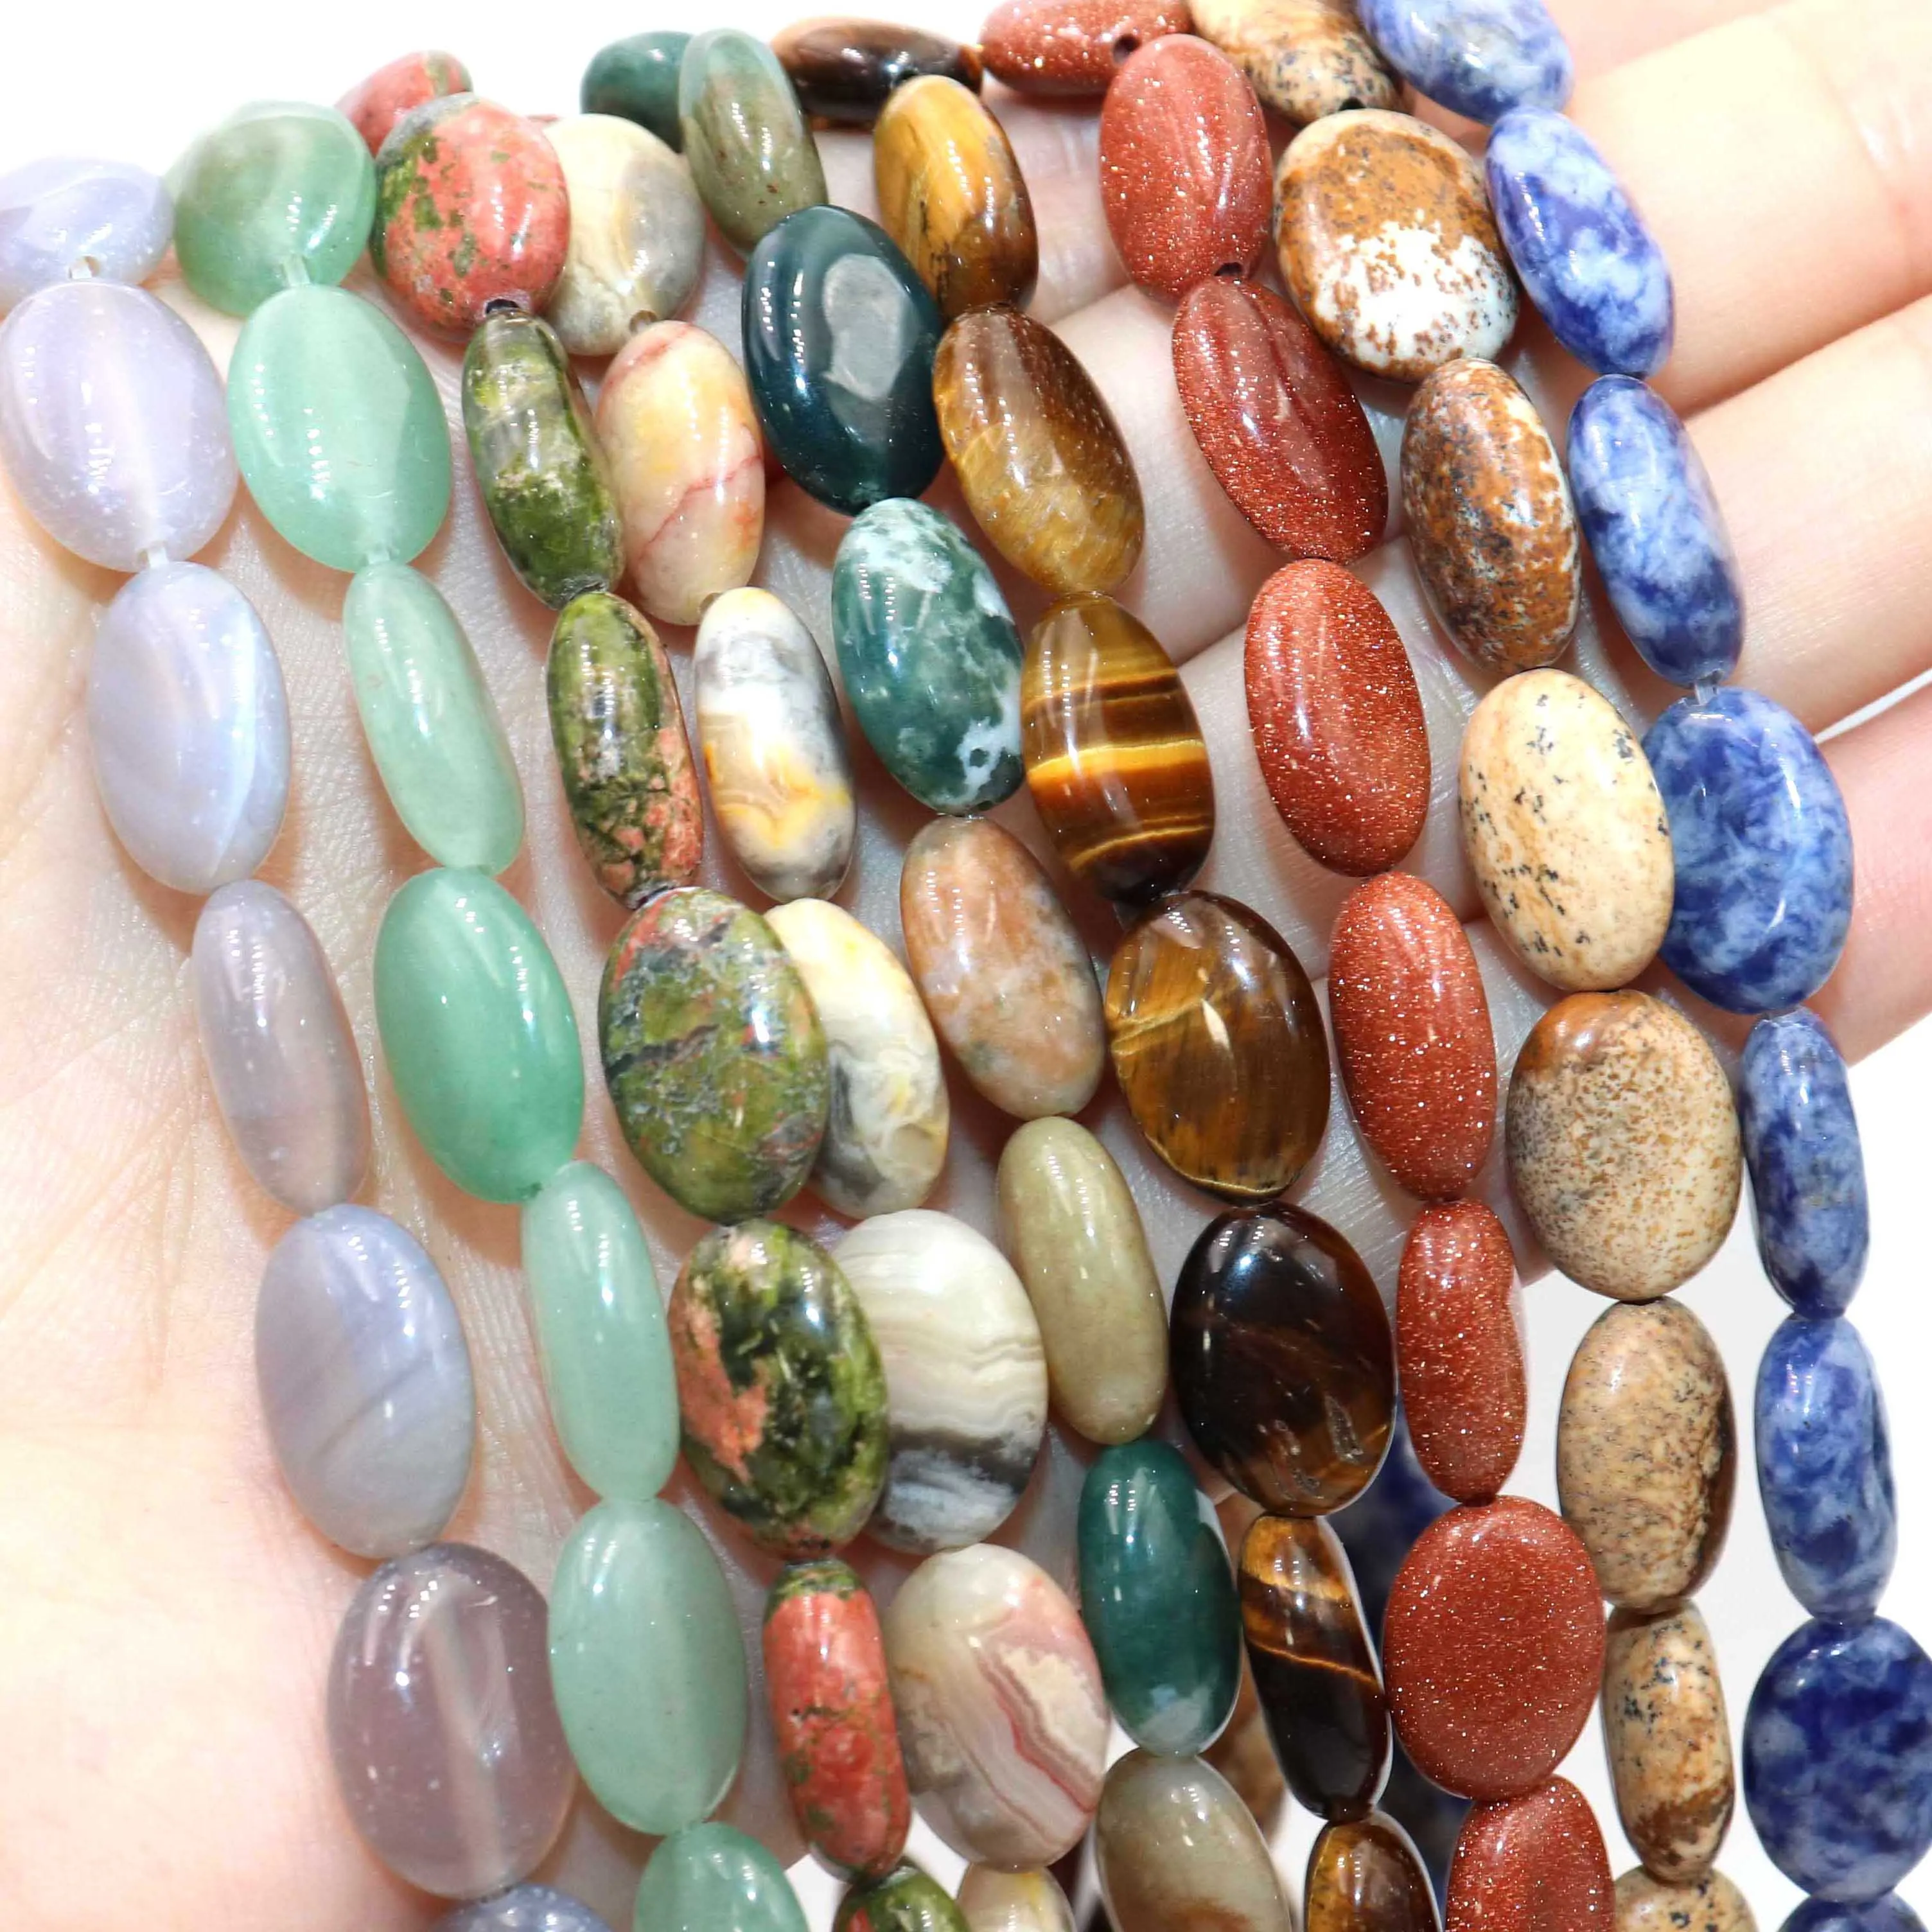 

Natural Oval Shape Stone Tiger Eye Opal Agates Jades Crystal Loose Spacer Beads For Jewelry Making Charm DIY Bracelet Necklace